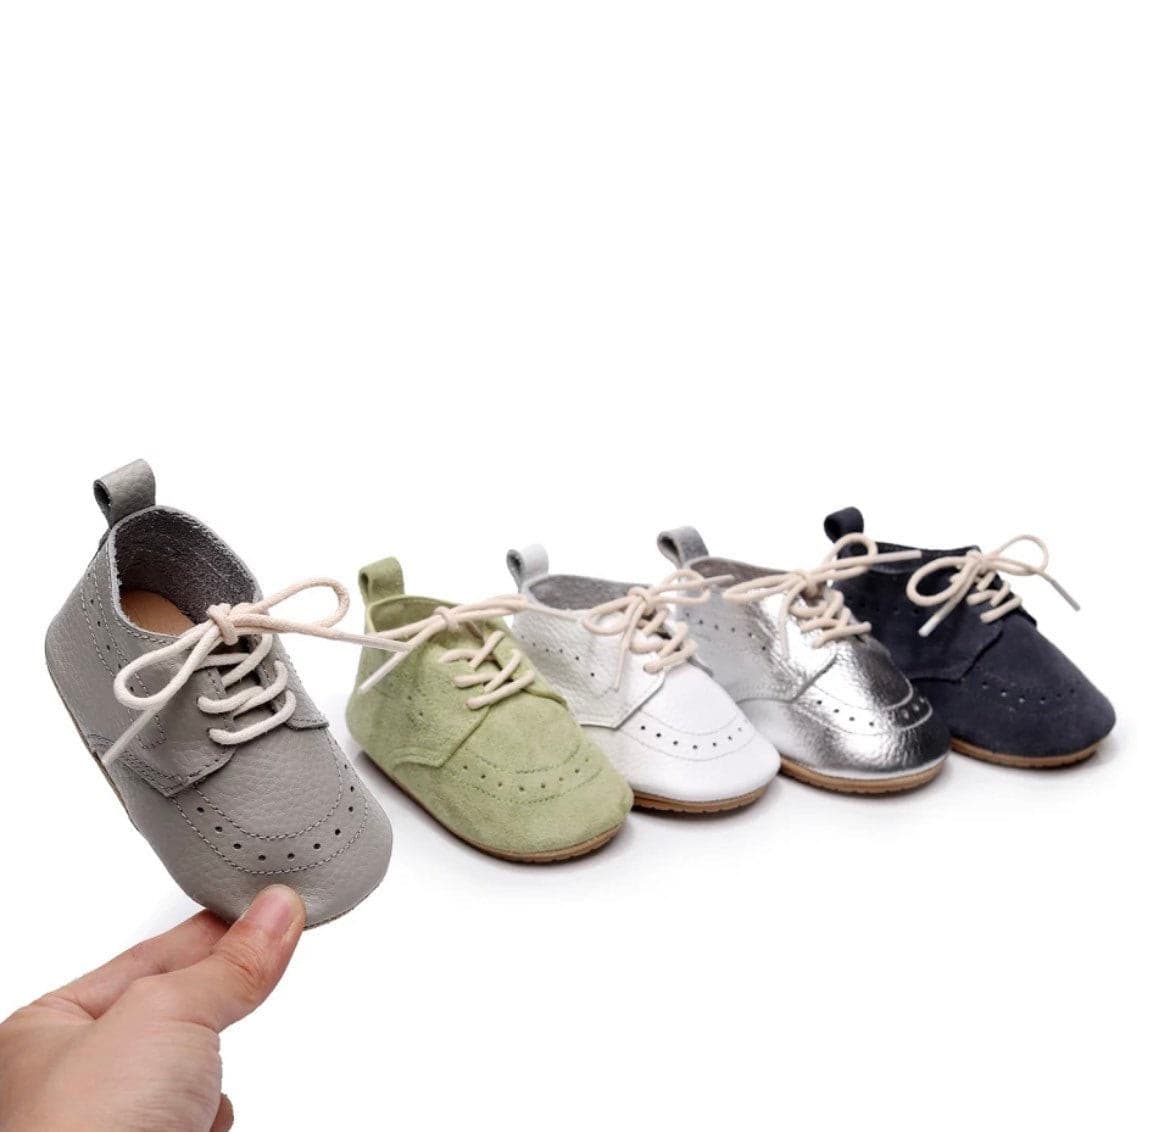 Baby Oxford Brogues - Handmade Genuine Leather Baby Shoes, White Leather.